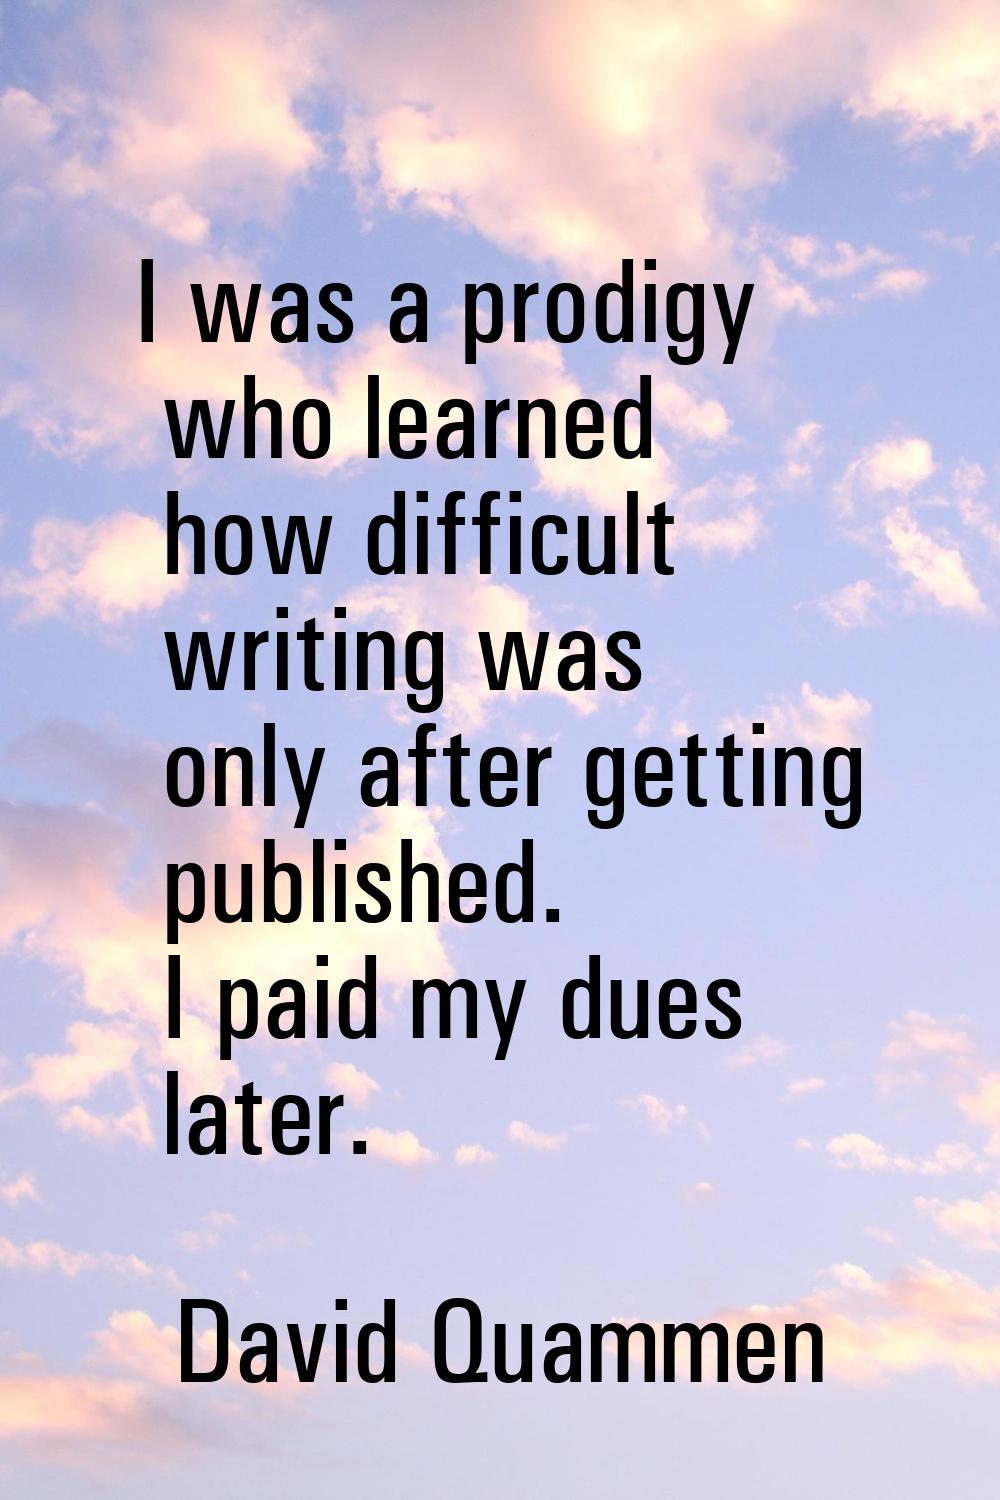 I was a prodigy who learned how difficult writing was only after getting published. I paid my dues 